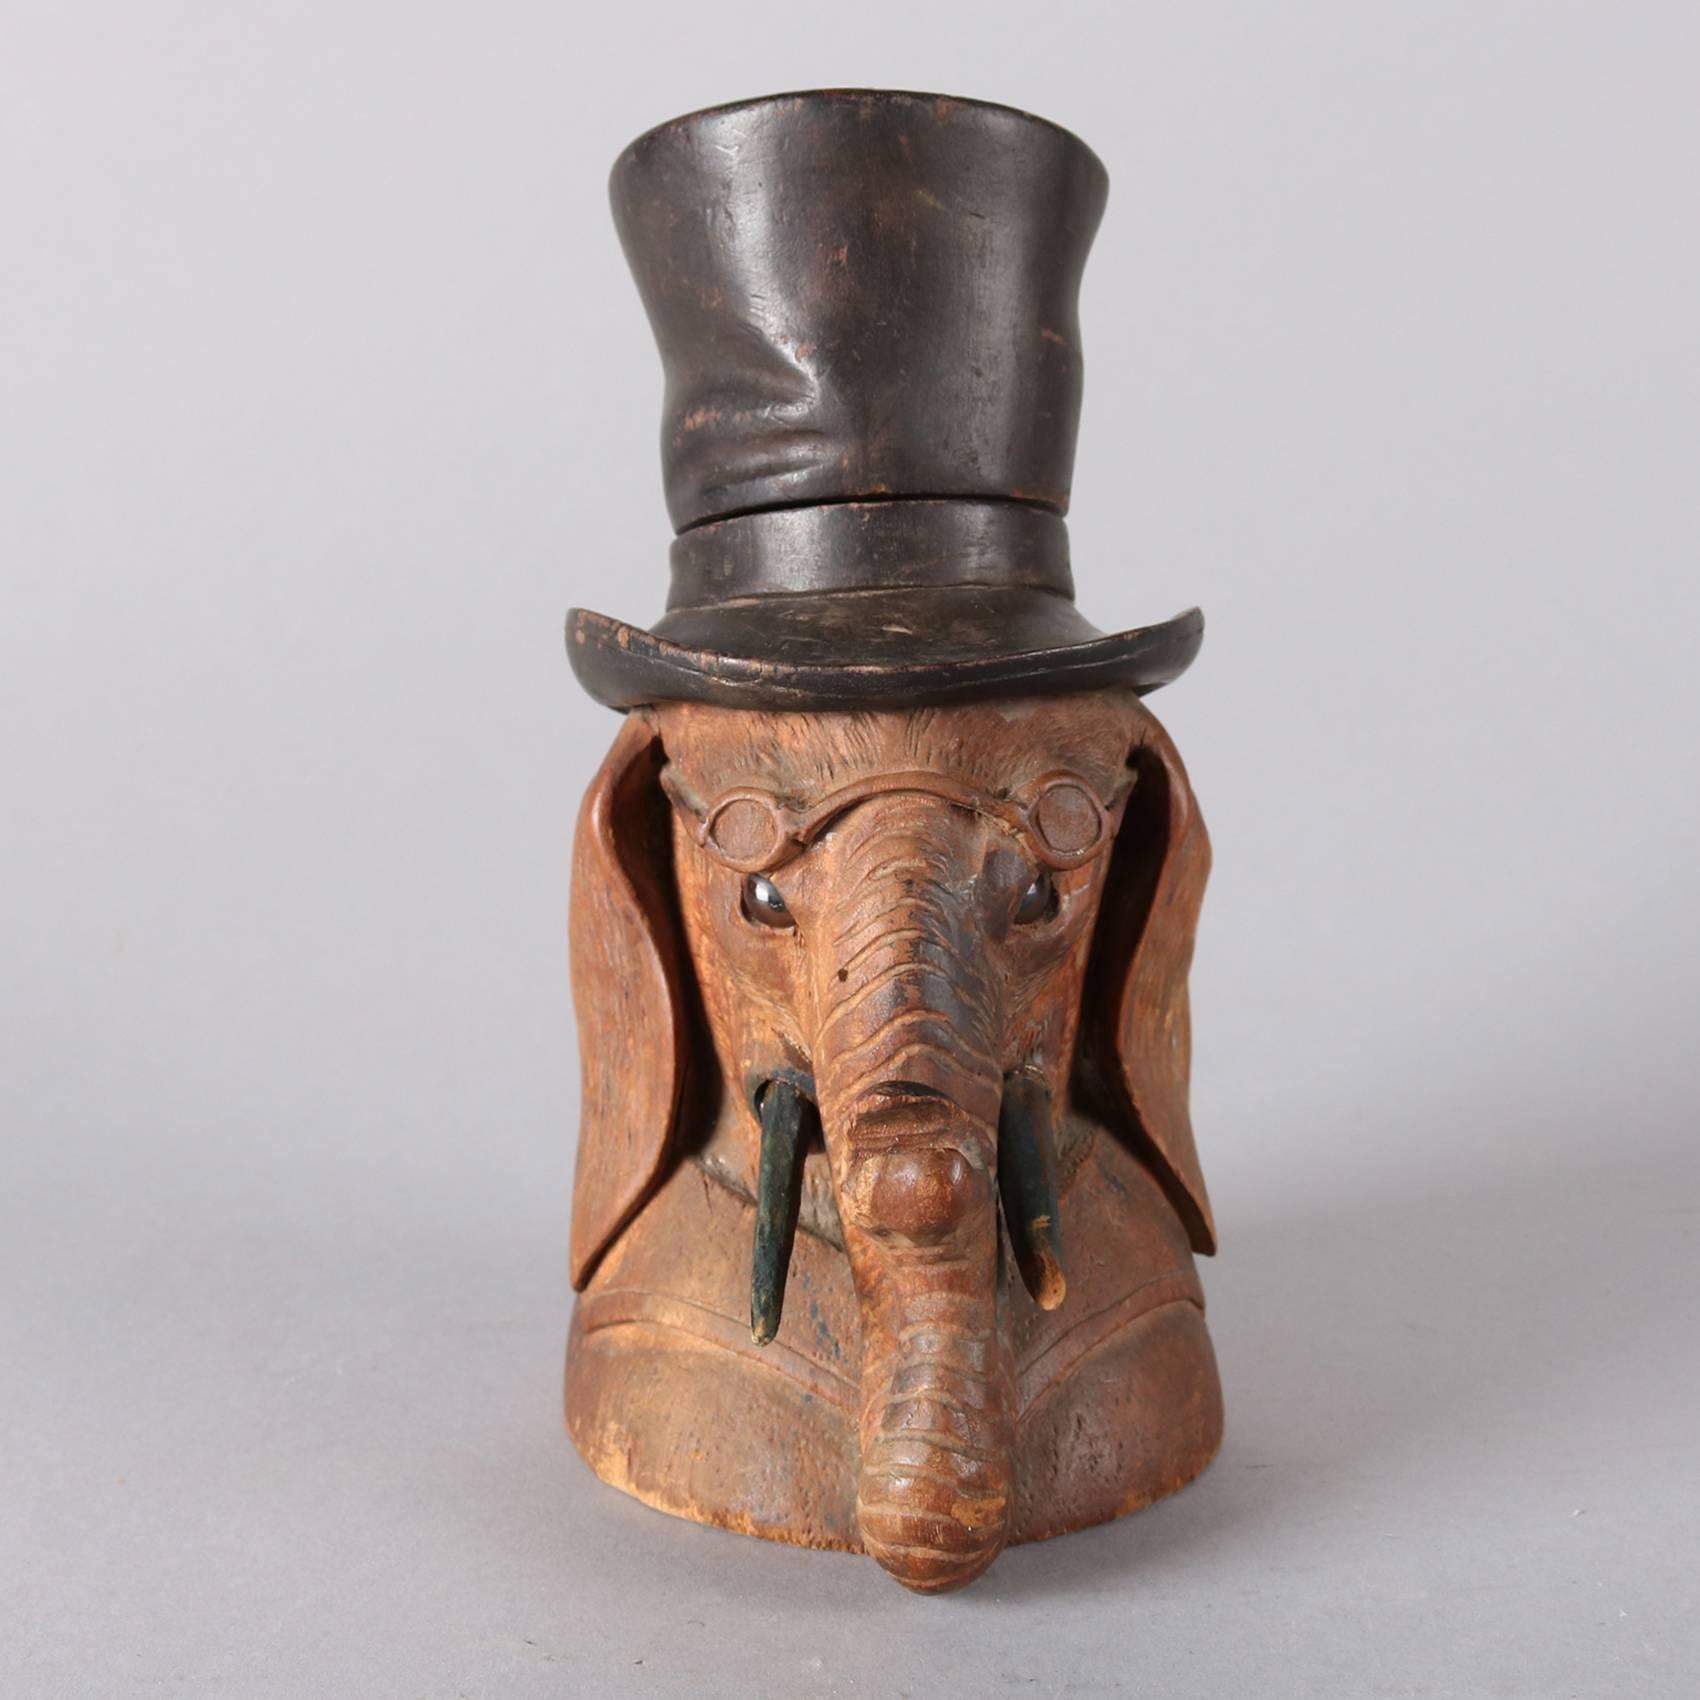 Antique German Black Forest figural ink well features hand-carved elephant with top hat and spectacles; ebonized hat, tusks and eyes; top hat opens to copper well inset, 19th century.

Measures: 7.5